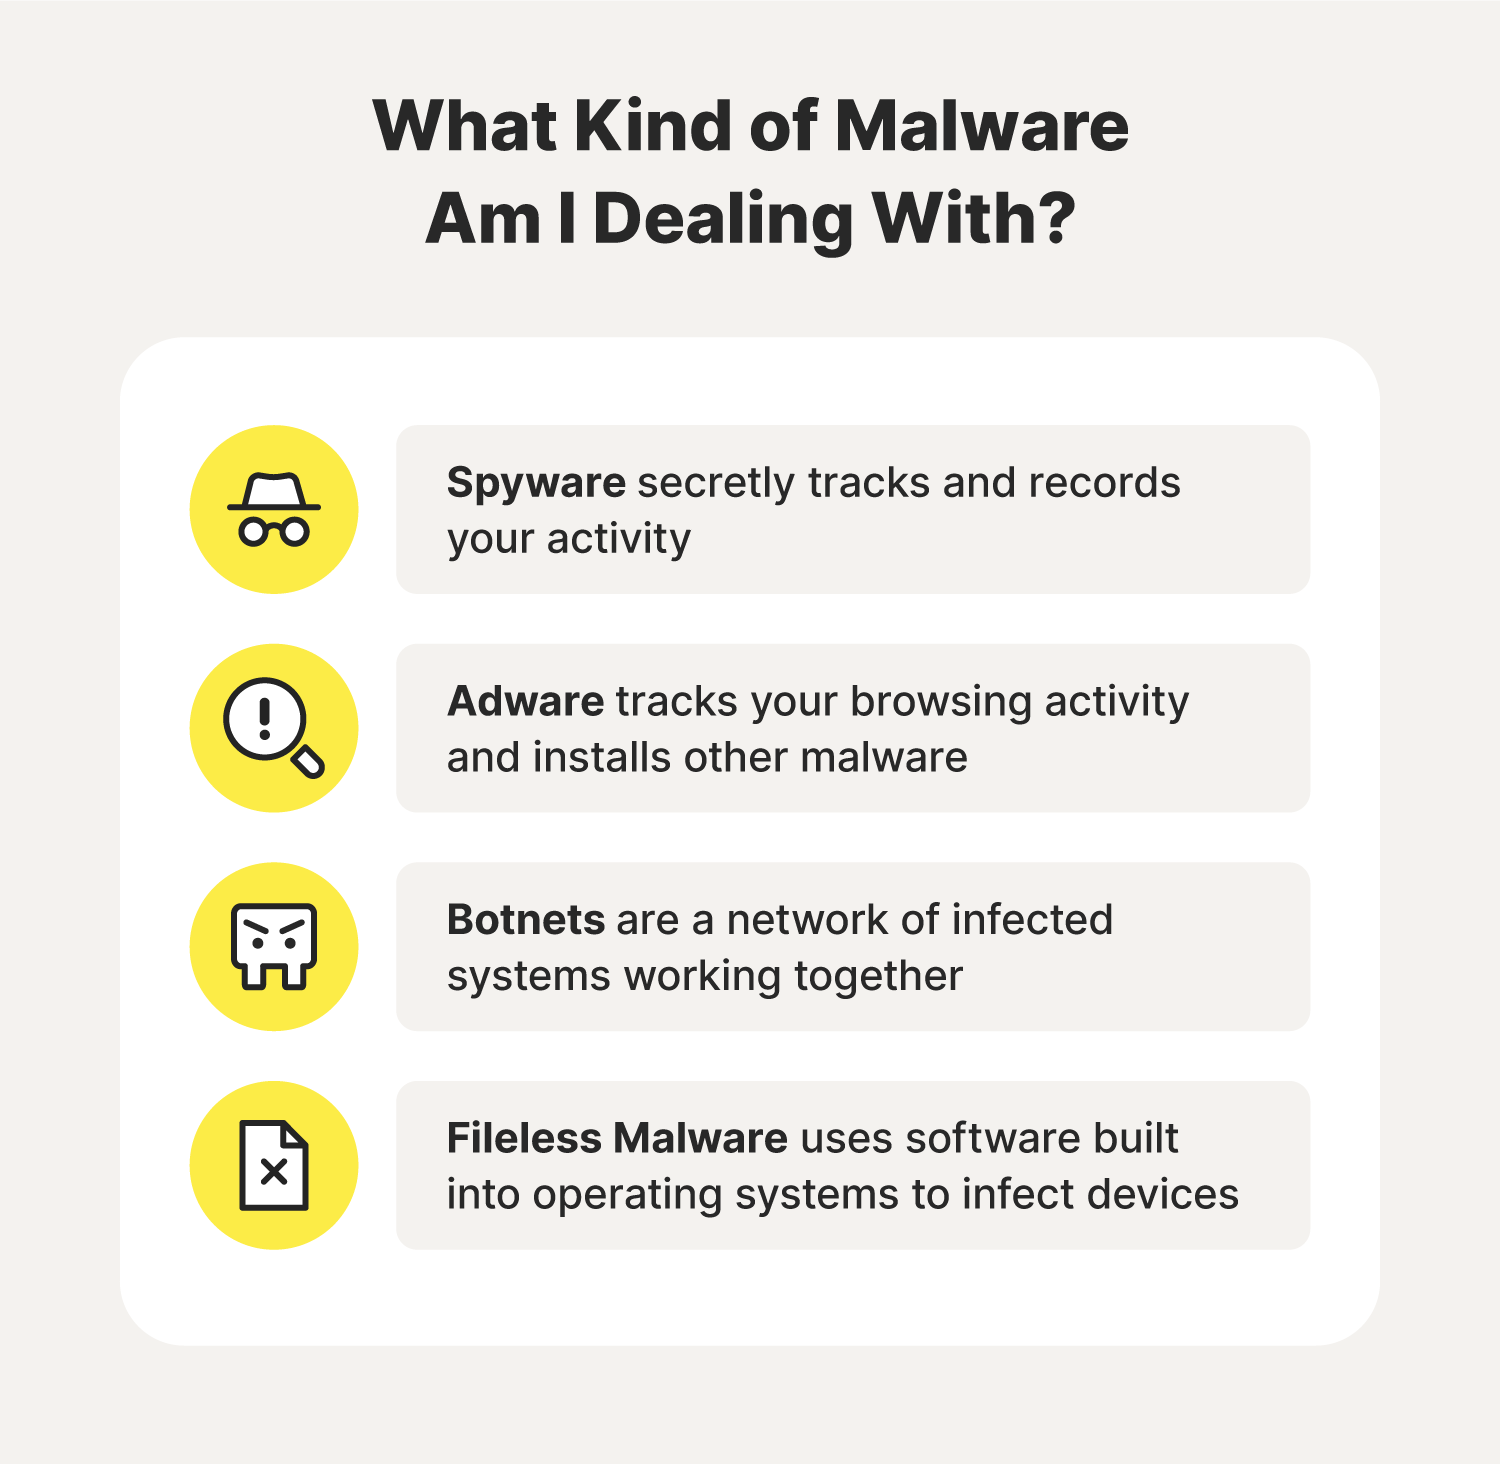 Illustrated chart covering spyware, adware, botnets, and fileless malware.